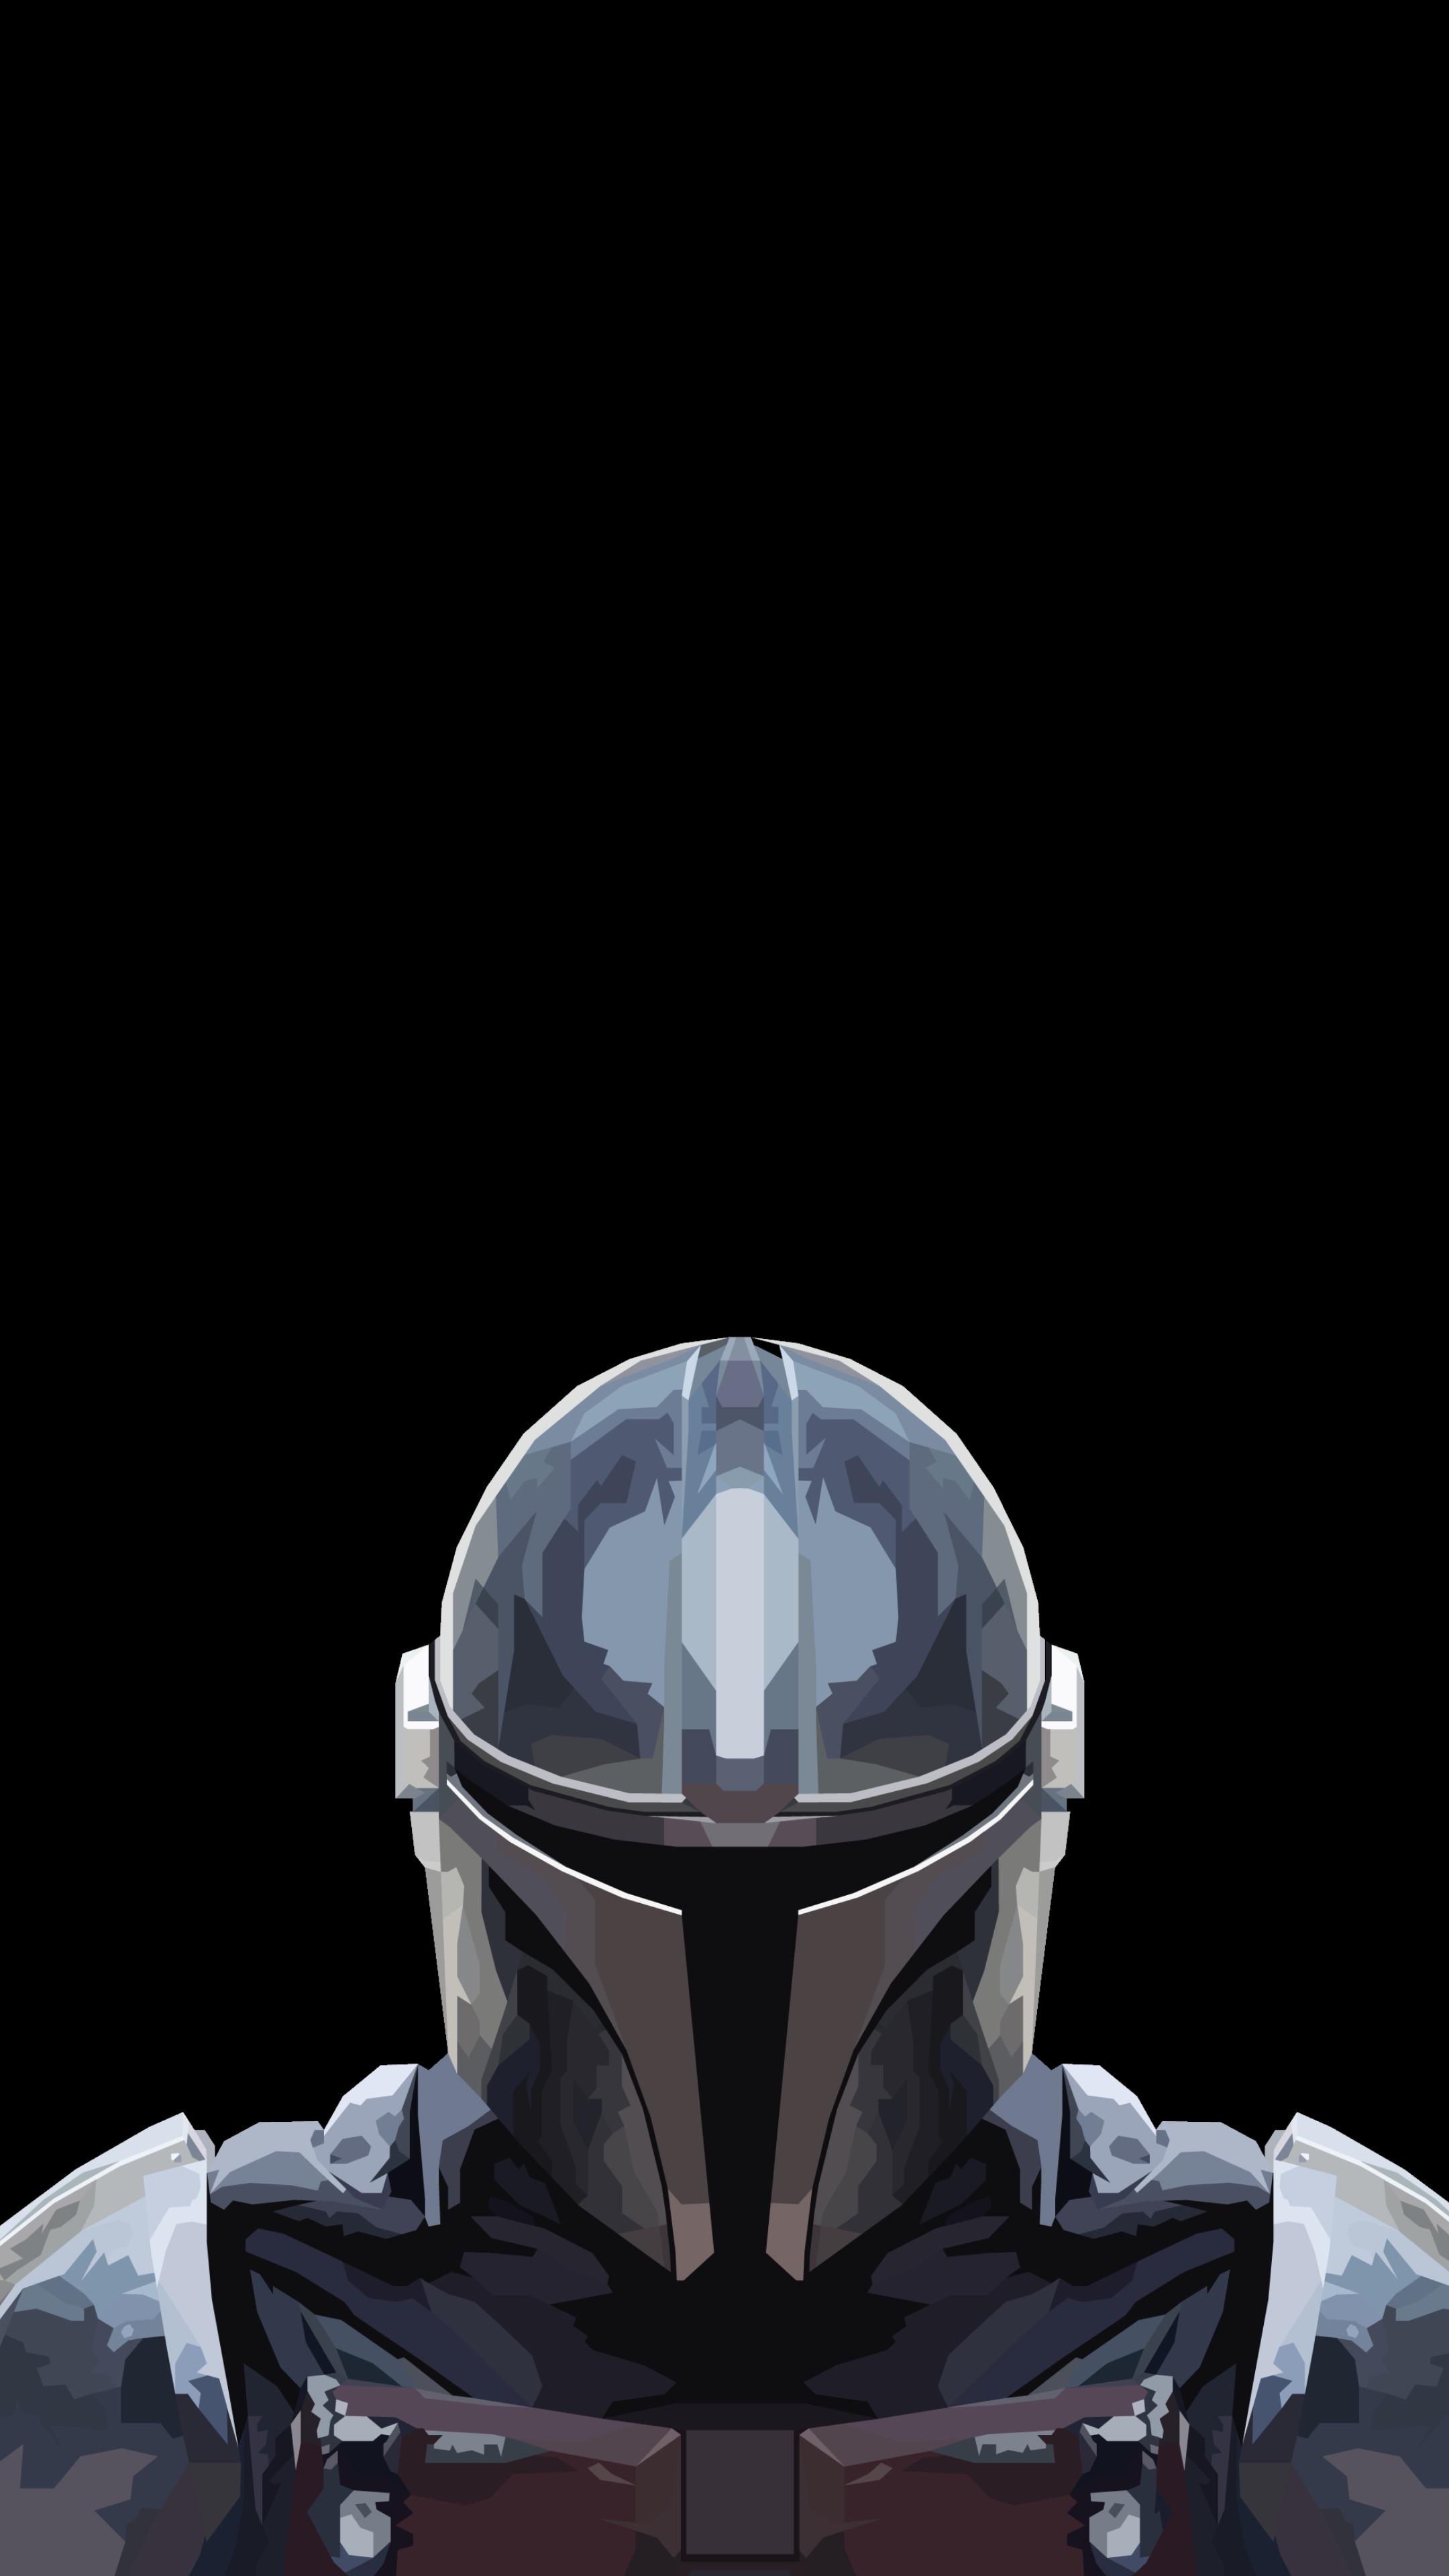 The Mandalorian wallpapers: OLED iPhone screens edition